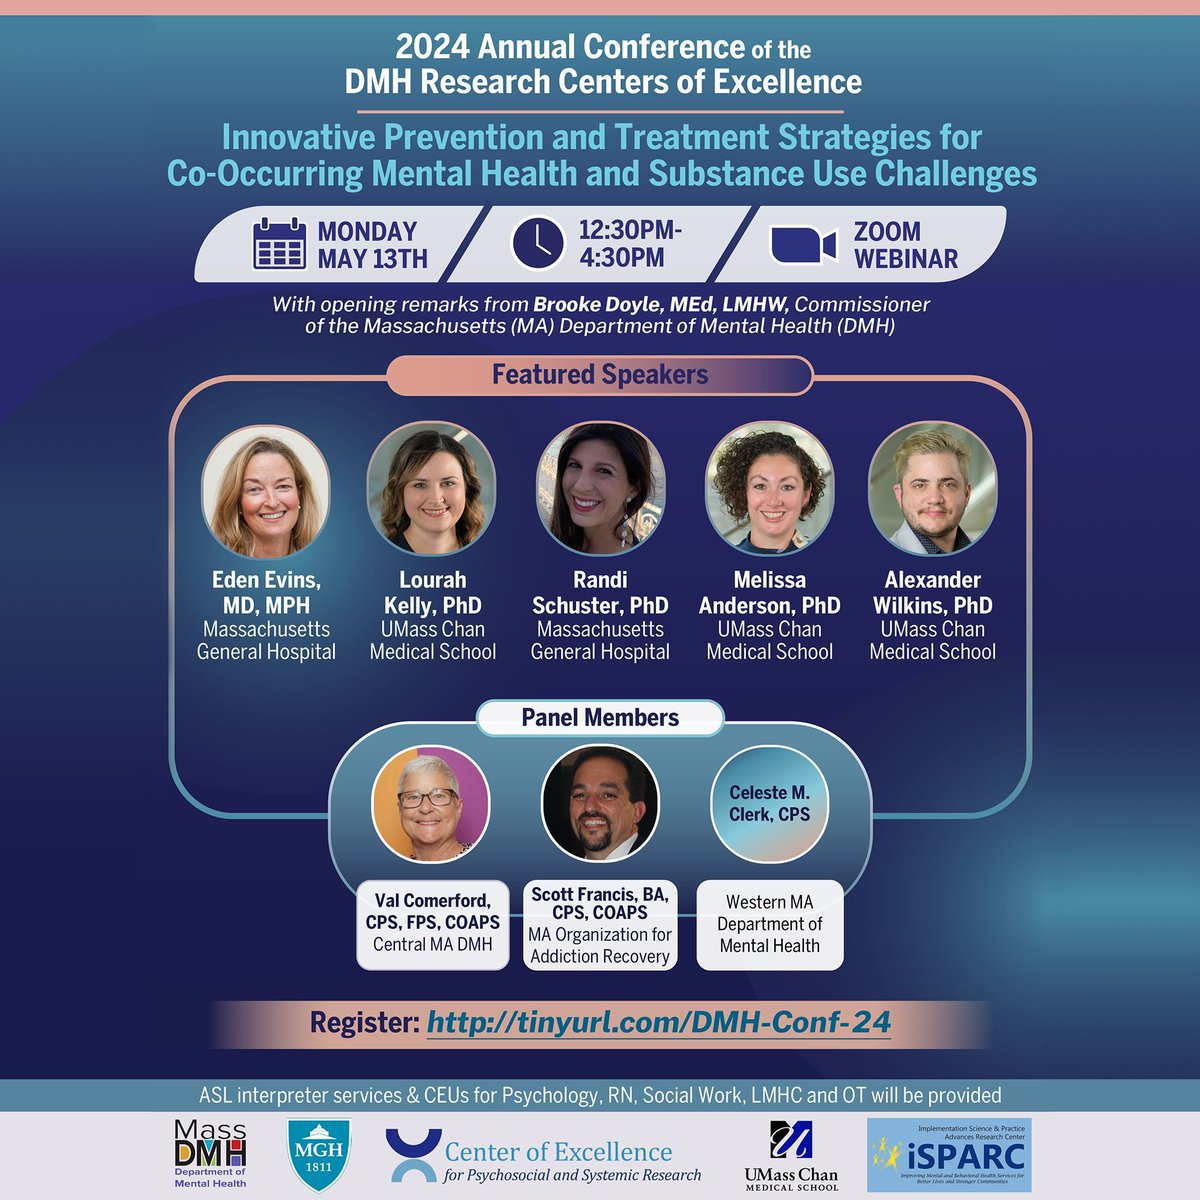 Register for the 2024 Annual @MassDMH Research Centers of Excellence Conference. Innovative Prevention & Treatment Strategies for Co-Occurring #MentalHealth & #SubstanceUse Challenges. buff.ly/3TVyLHQ @MW_Convos @MassGeneralNews @NAMIMass @MassDPH @UMassChan